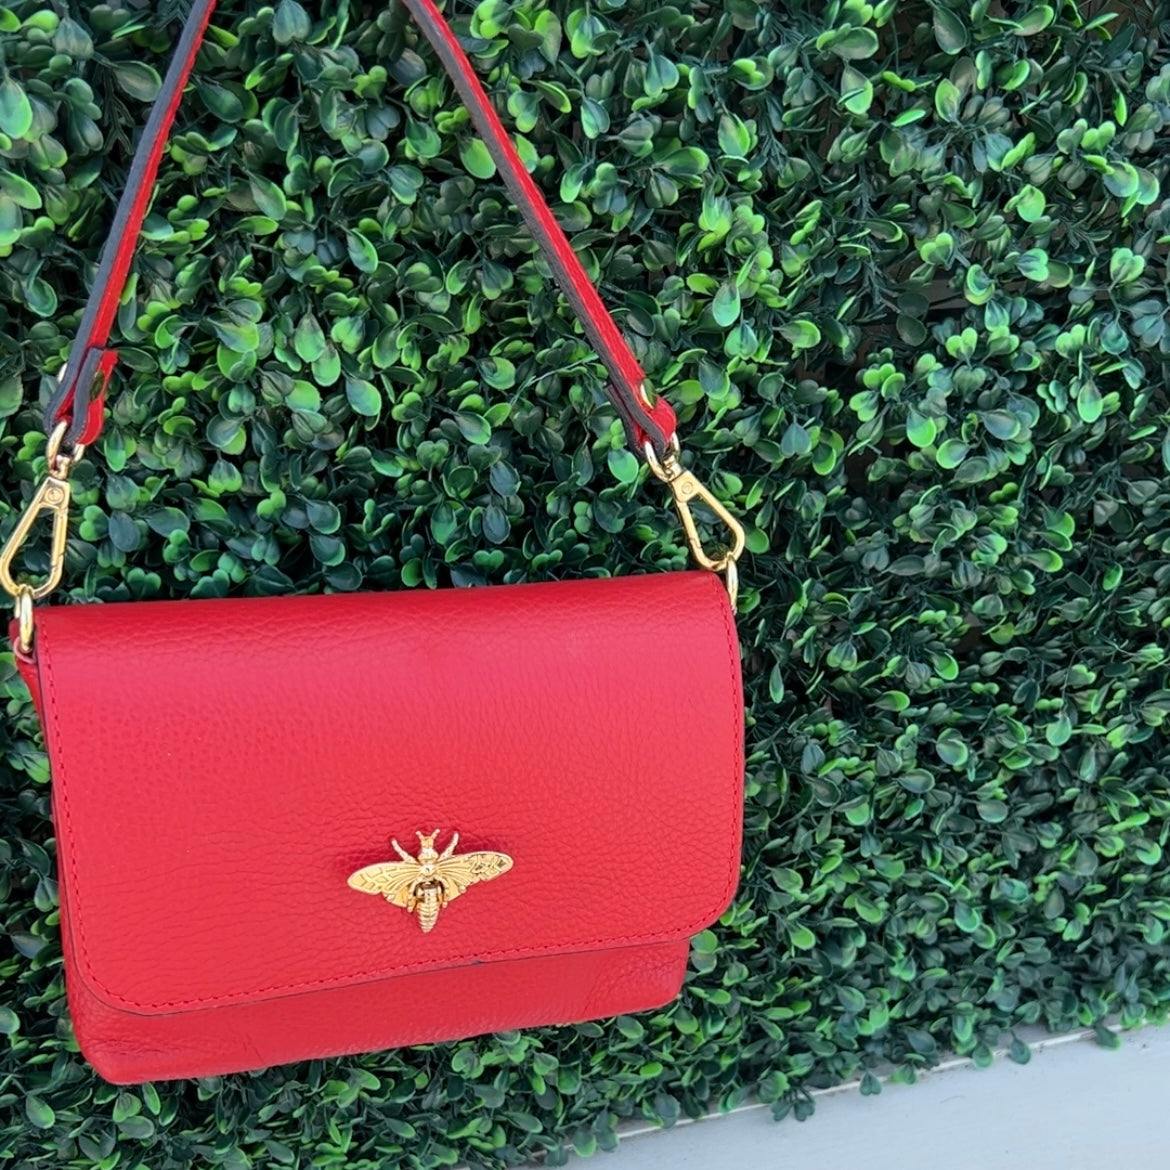 Genuine Leather Bee Bag | Women's Boutique | Houston Texas Red / 6x8